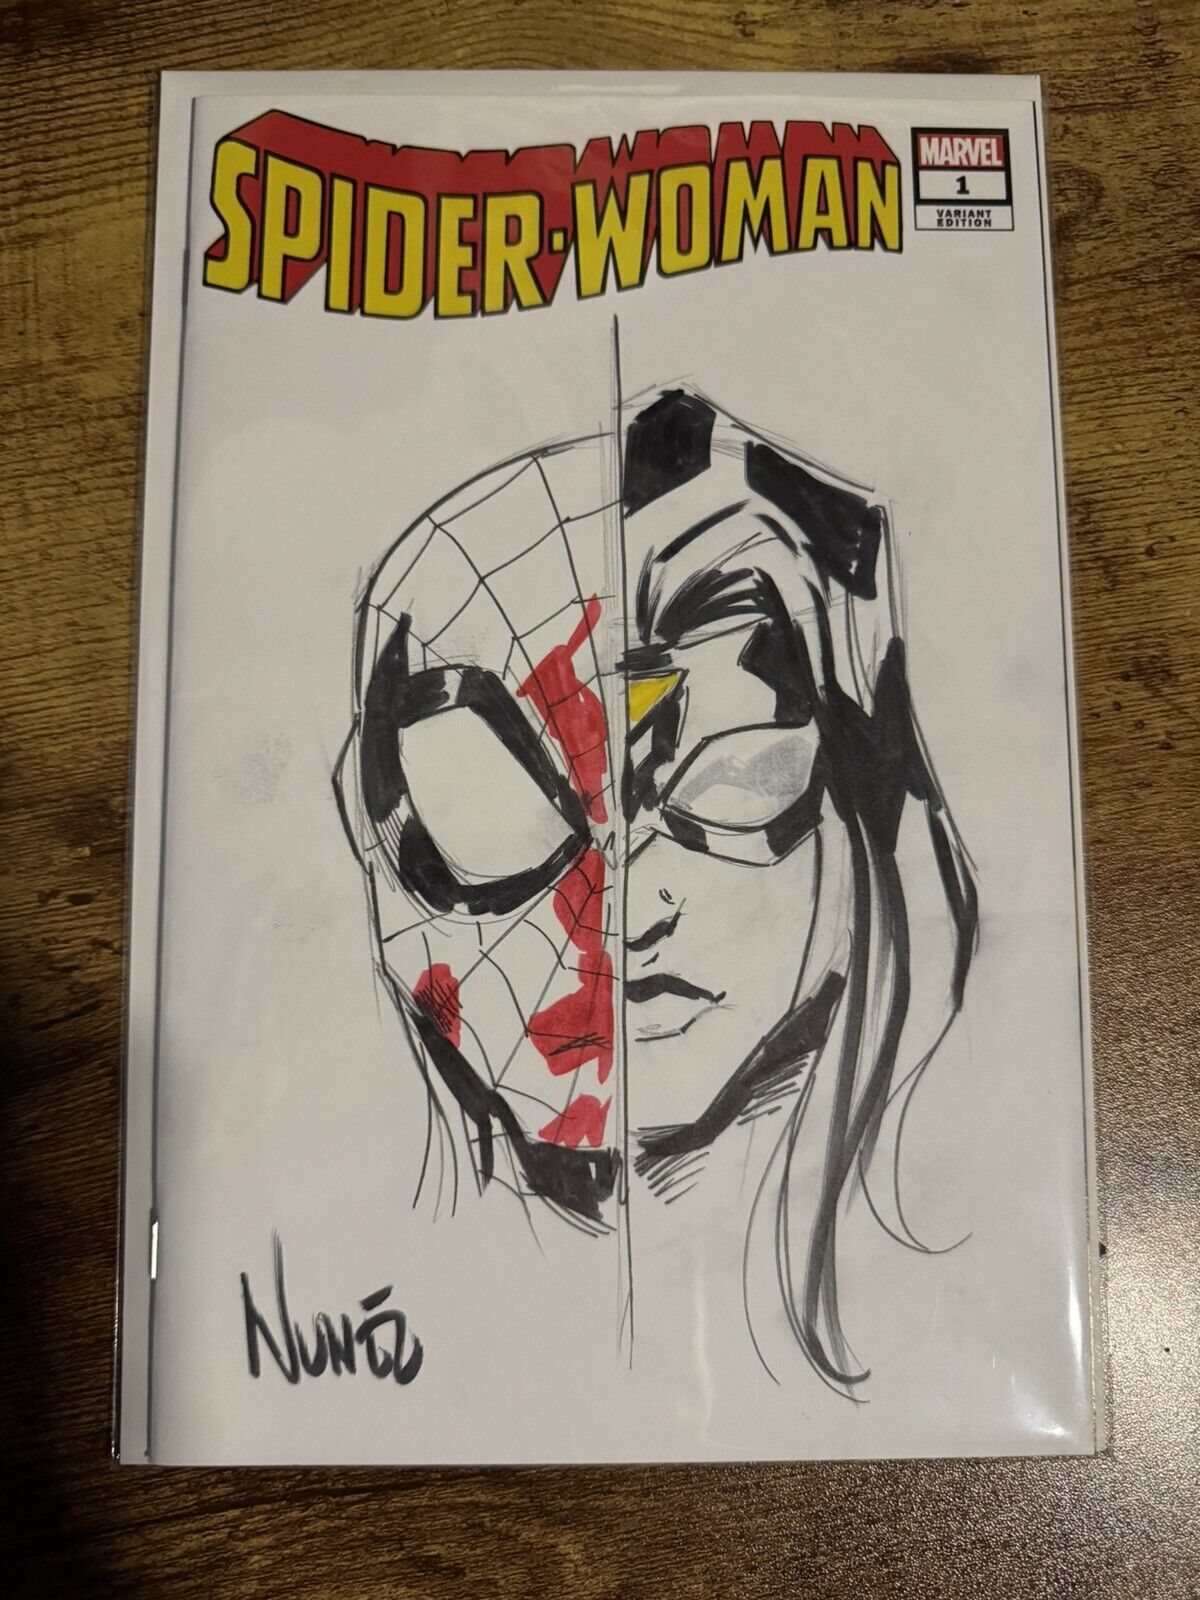 Spider-woman#1 Blank Sketch Variant Cover Signed & Sketched By Eddie Nunez COA